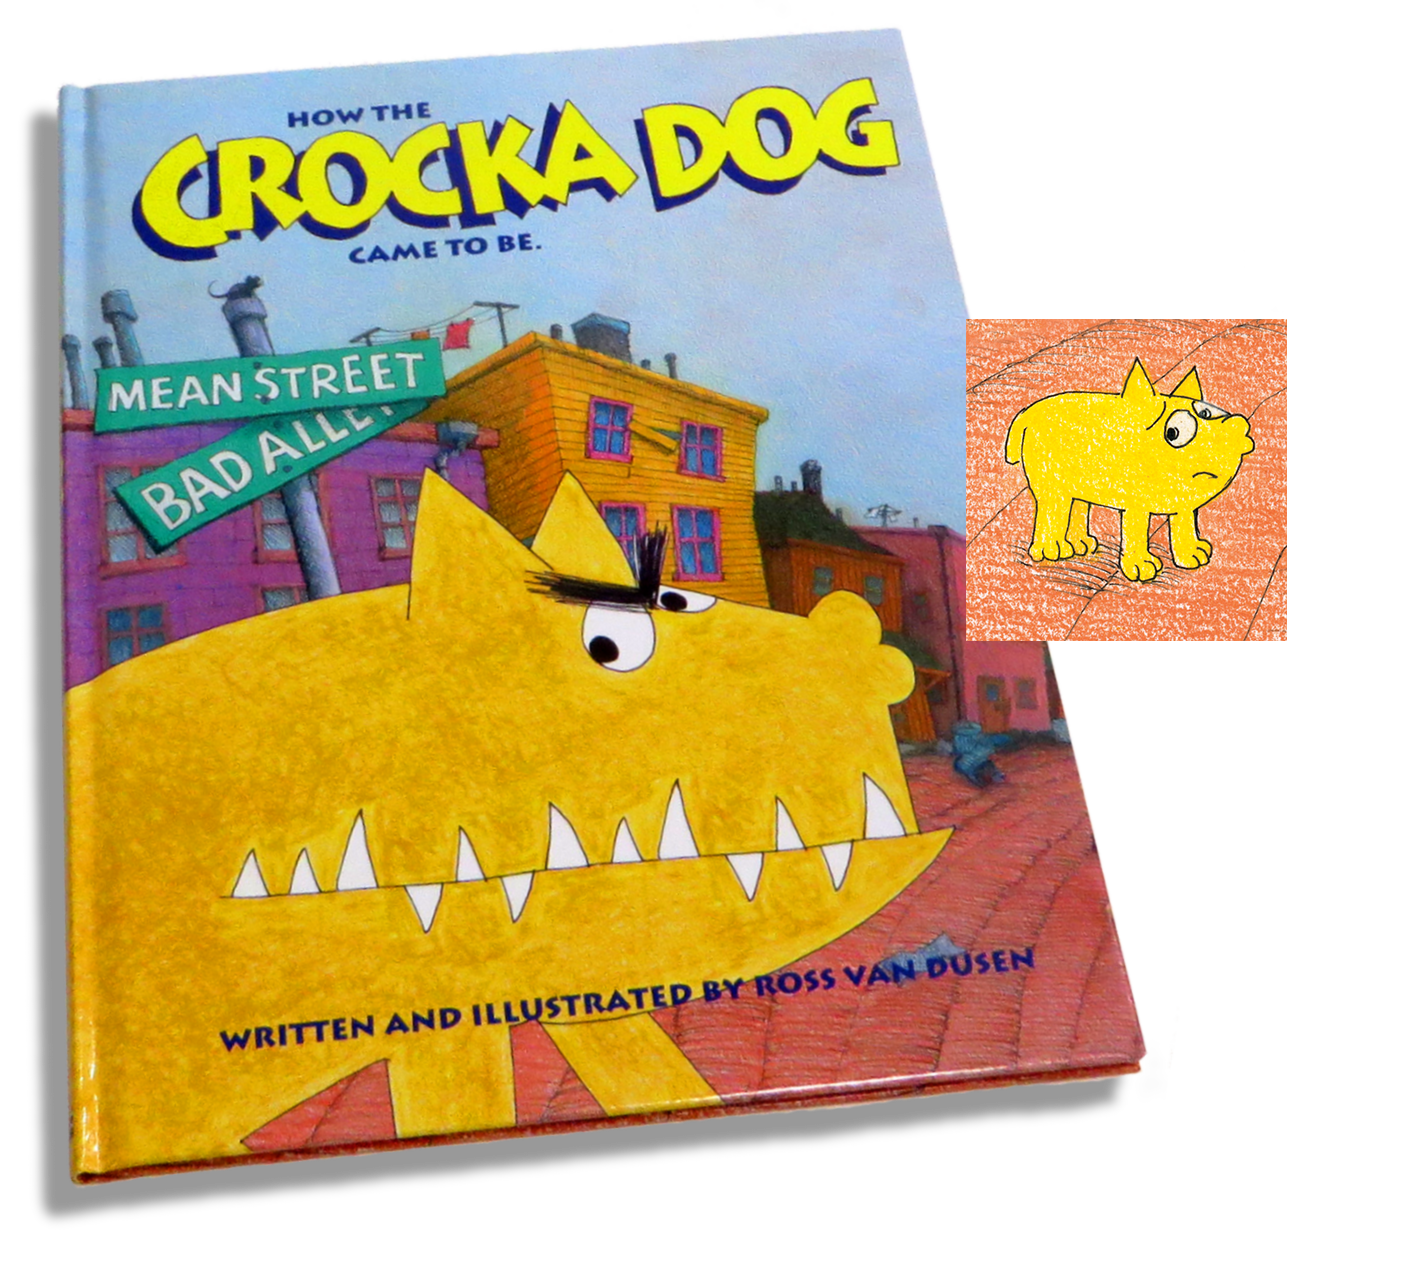 How The Crocka Dog Came To Be book